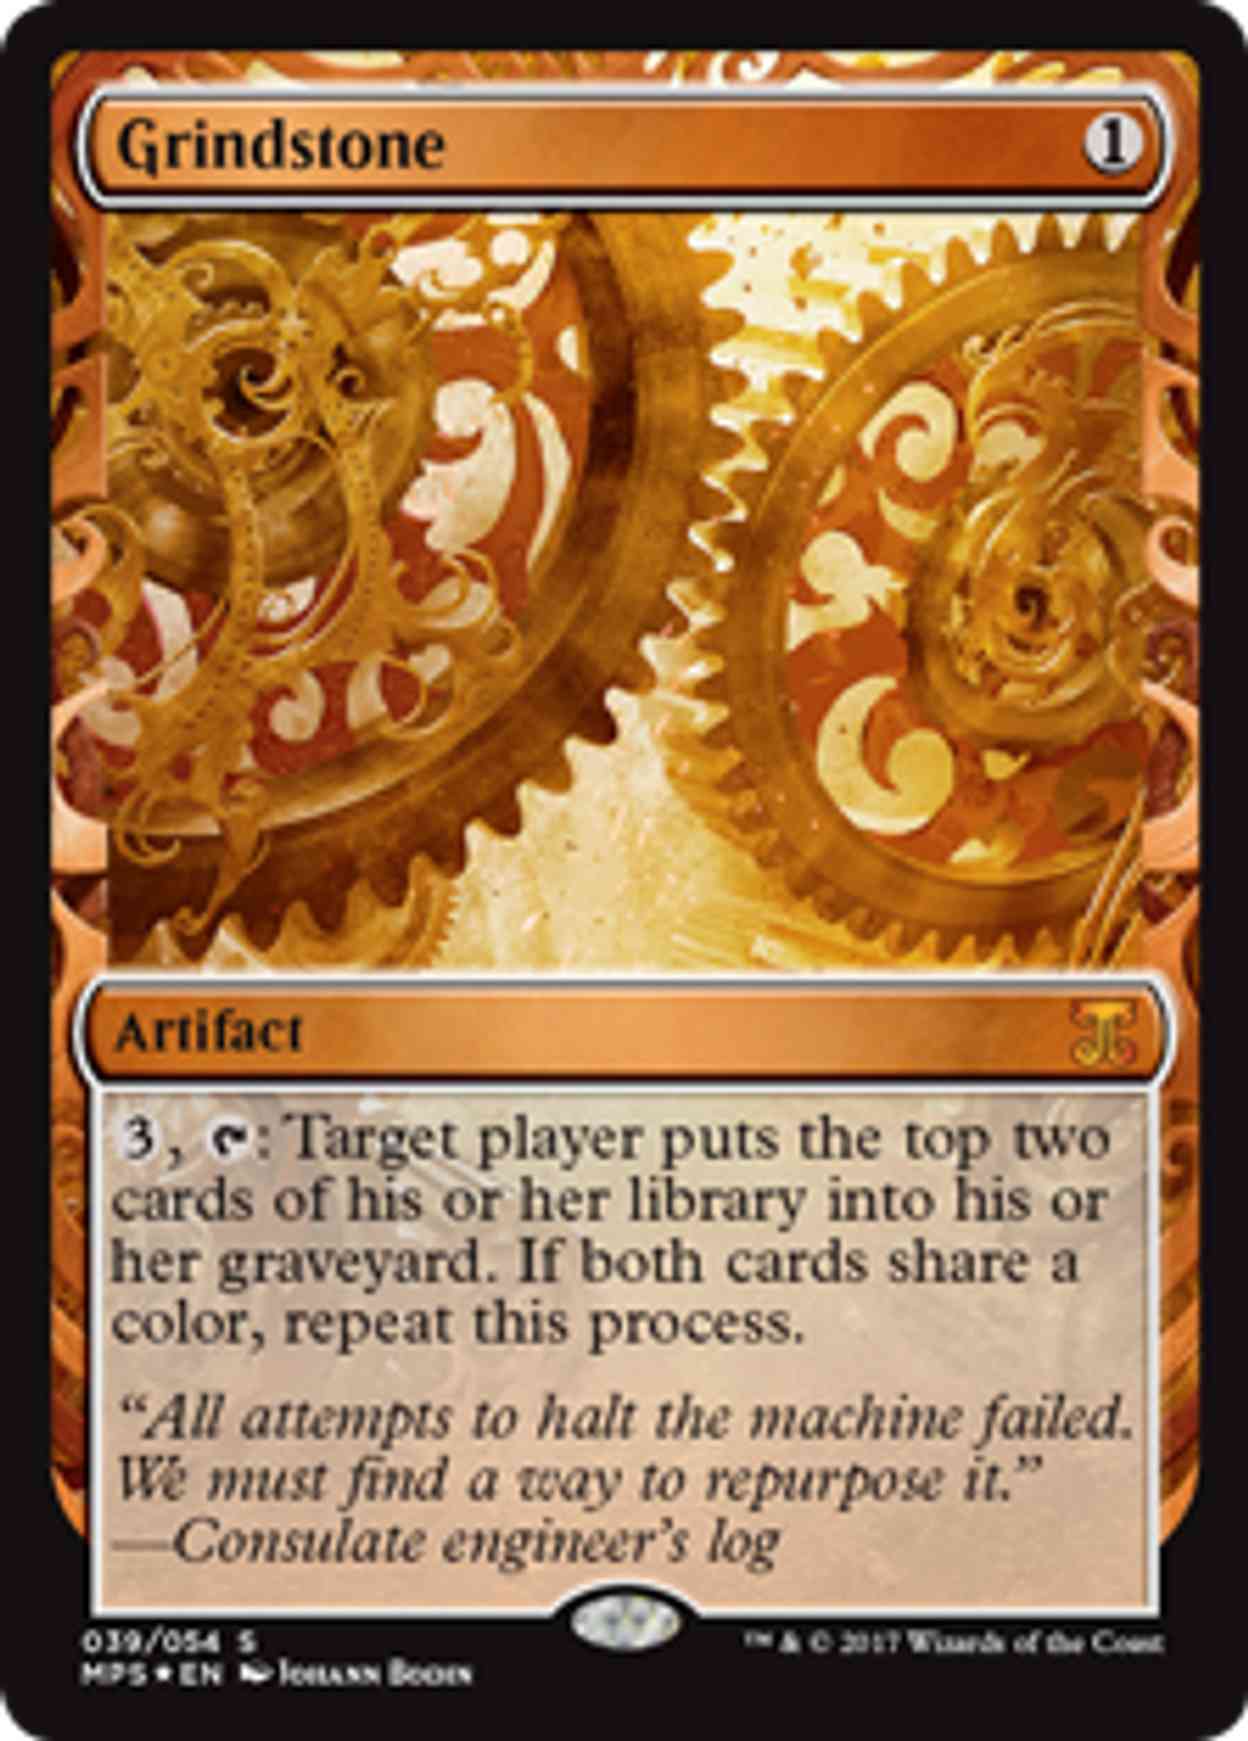 Grindstone magic card front